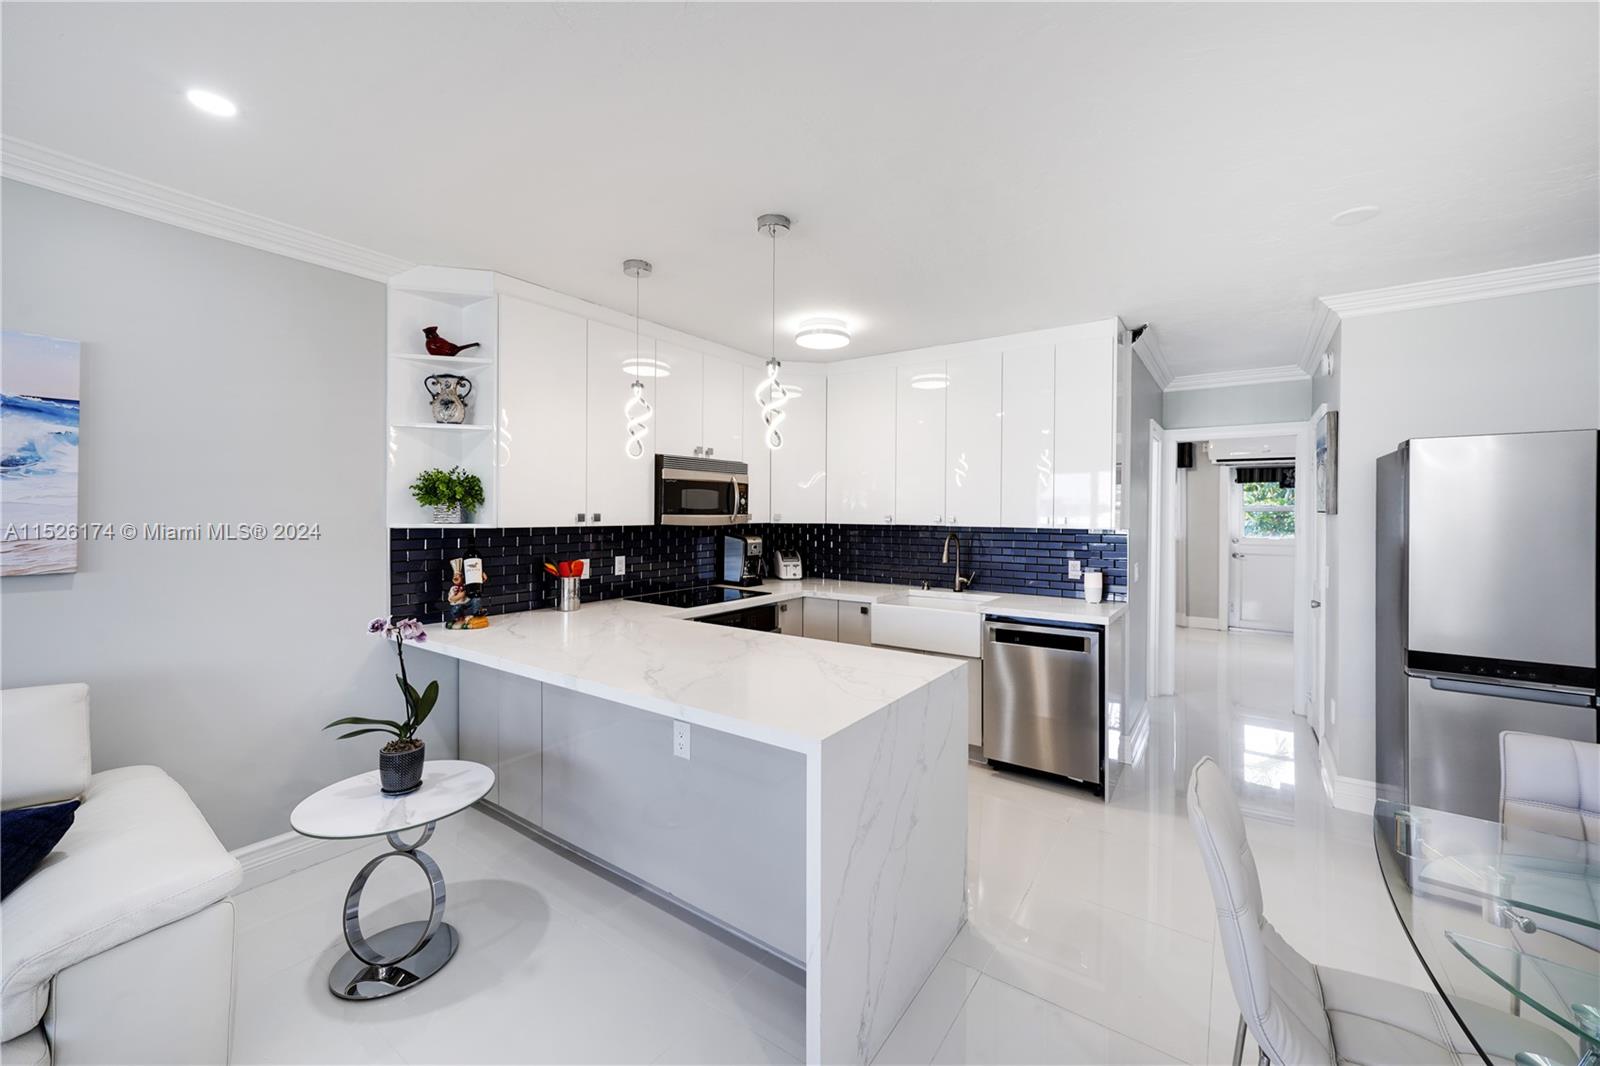 a kitchen with stainless steel appliances kitchen island a refrigerator and a counter top space